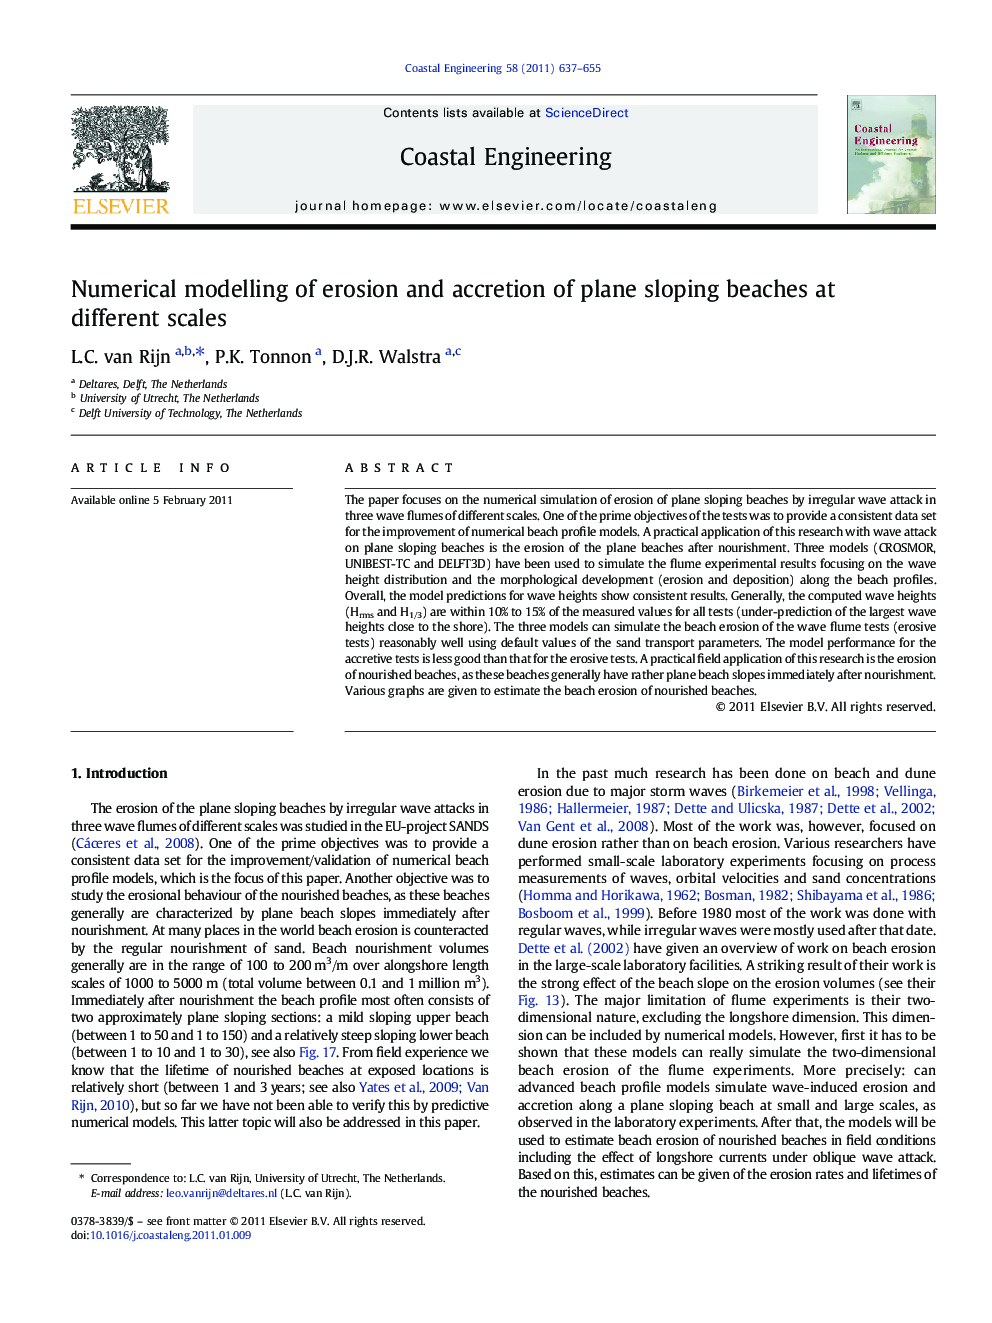 Numerical modelling of erosion and accretion of plane sloping beaches at different scales